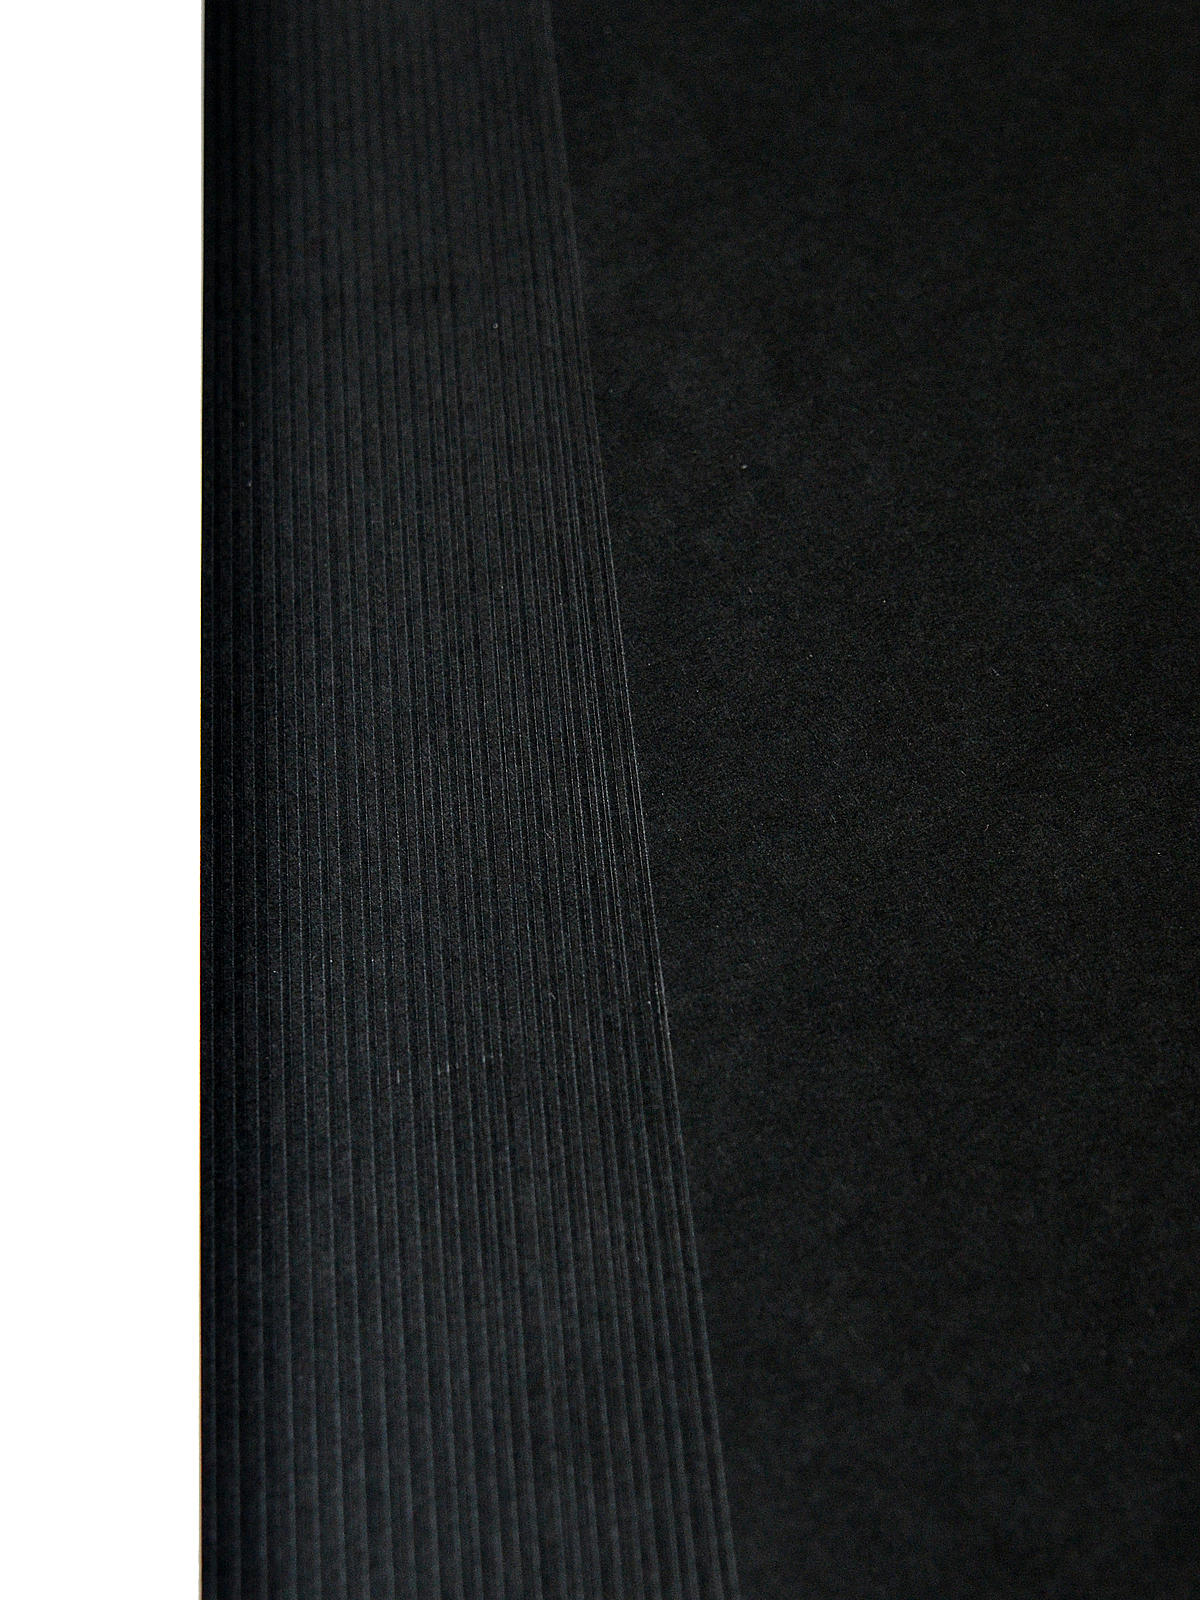 Sulphite Construction Paper Black 18 In. X 24 In. 50 Sheets